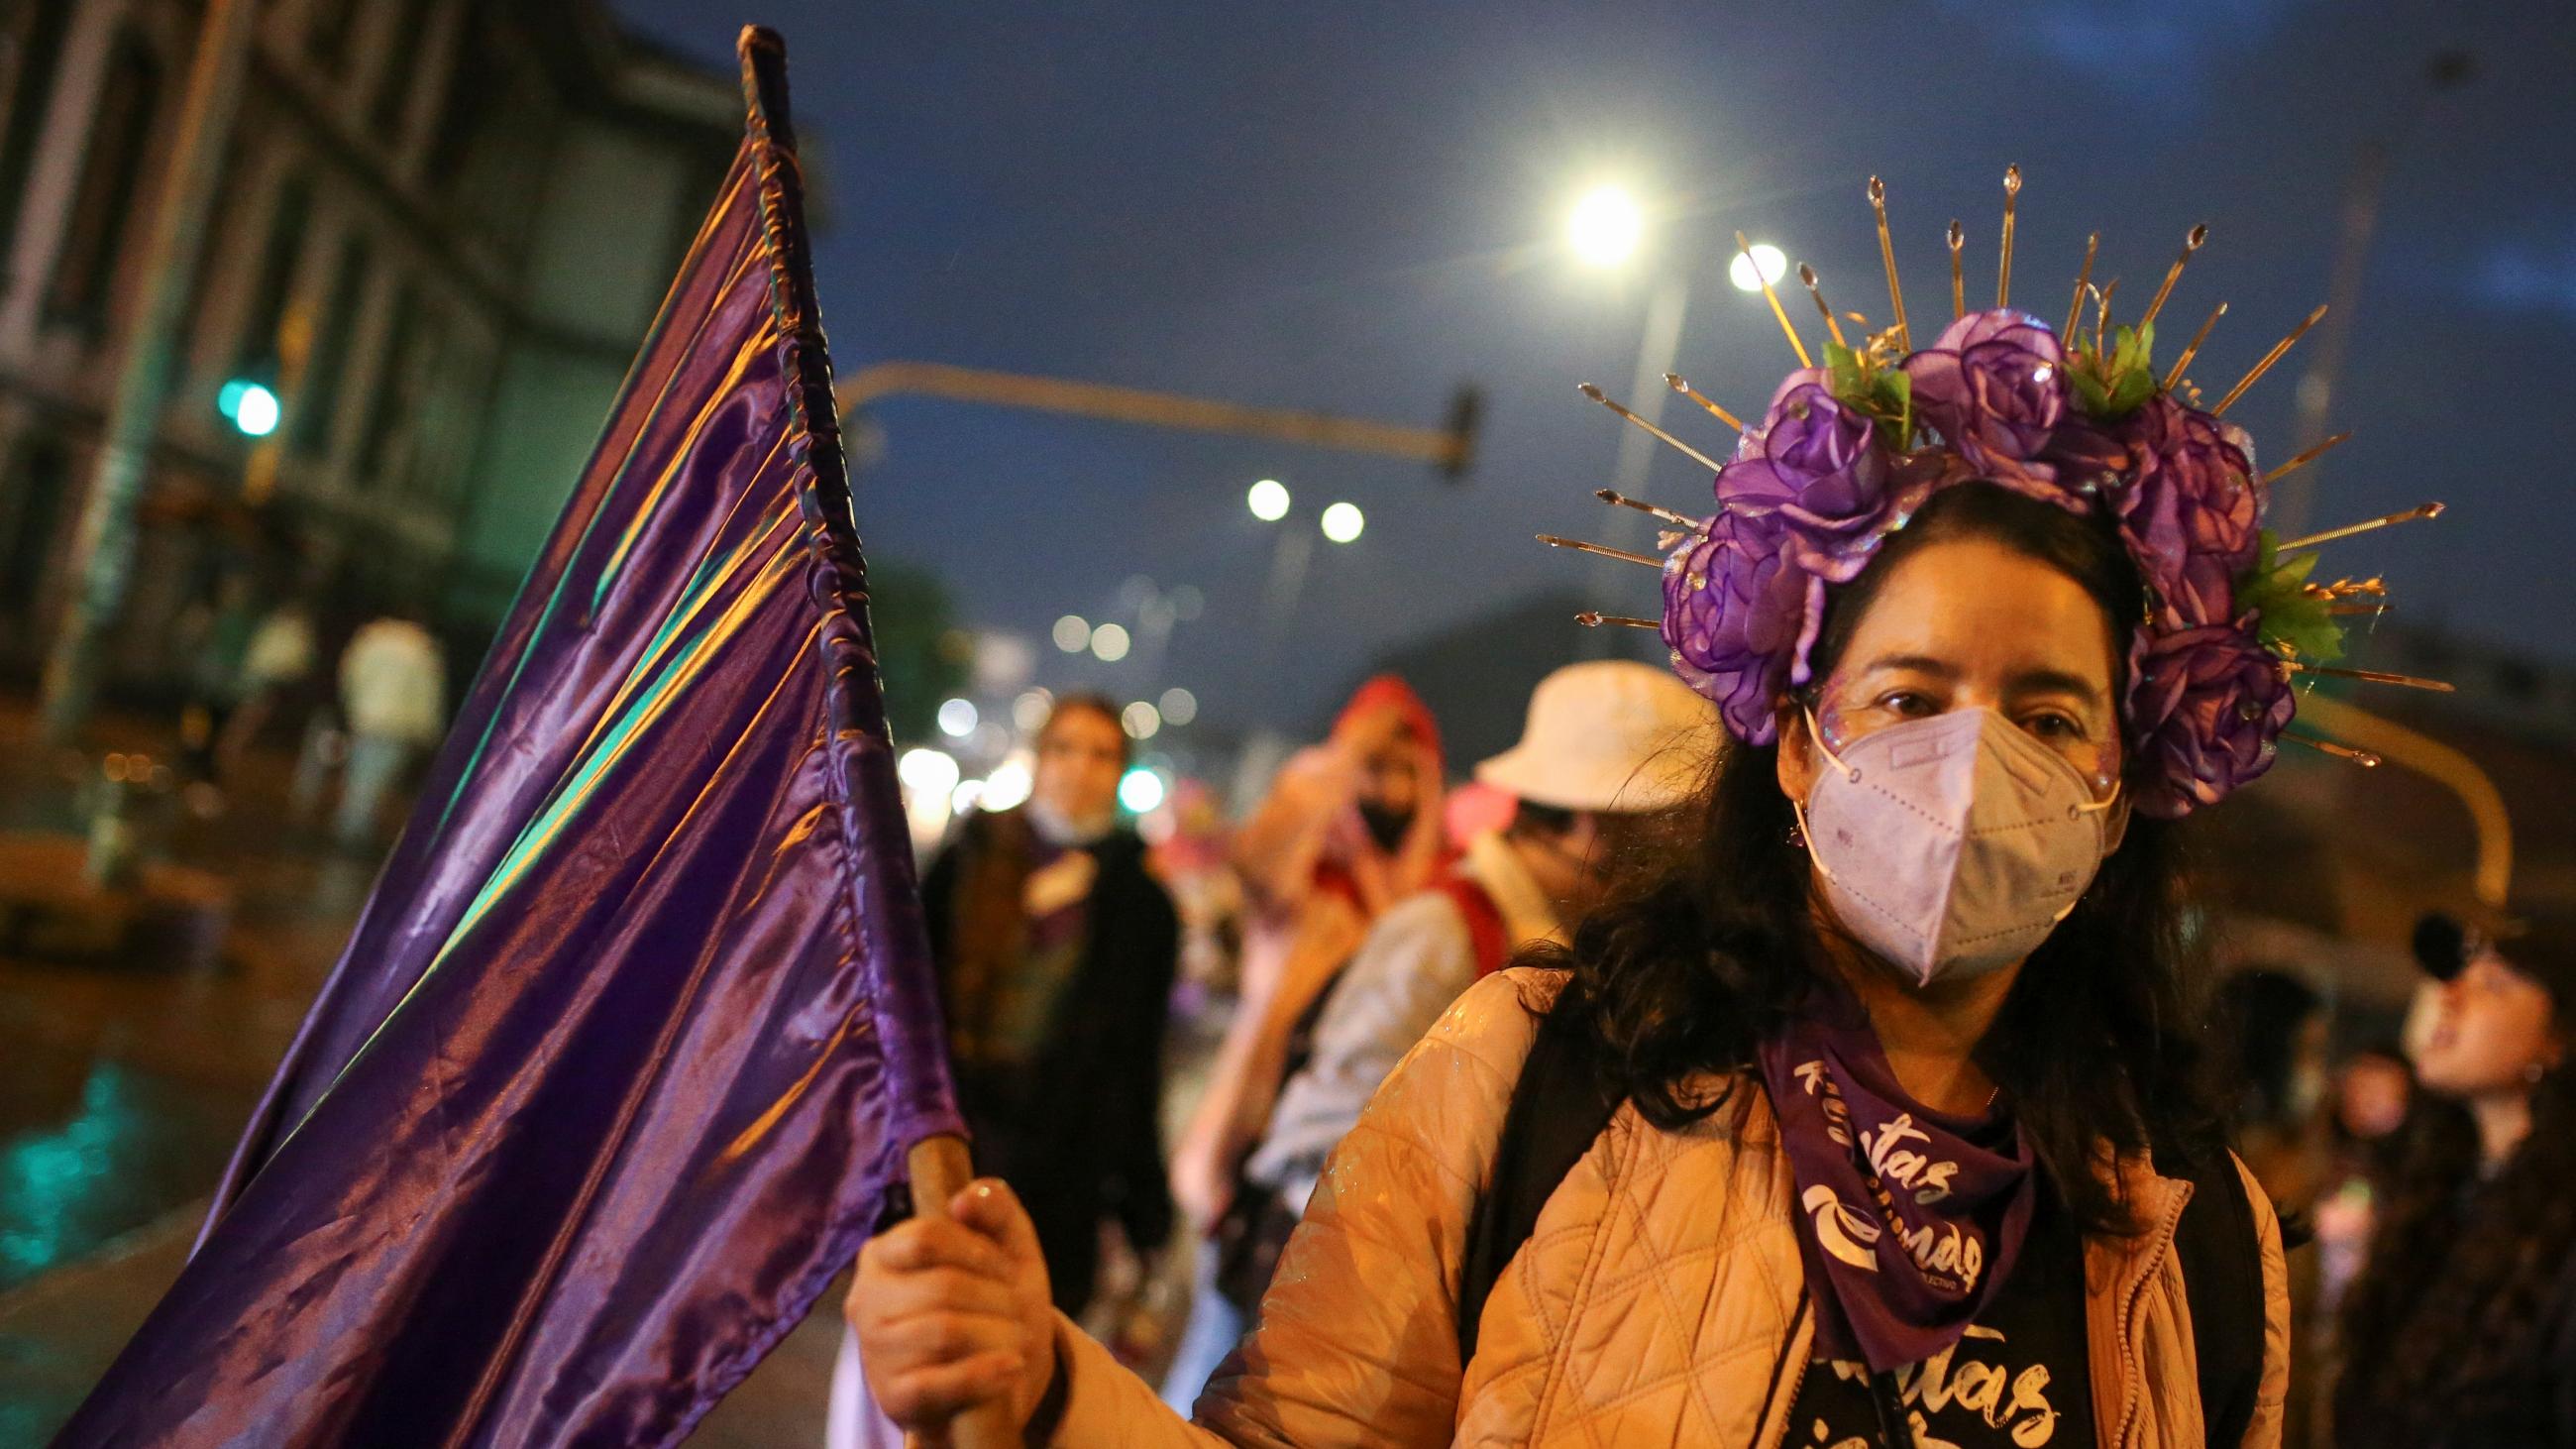 DOCUMENT DATE: November 25, 2021 A woman takes part in a protest to mark the International Day for the Elimination of Violence against Women, in Bogota, Colombia November 25, 2021. REUTERS/Luisa Gonzalez